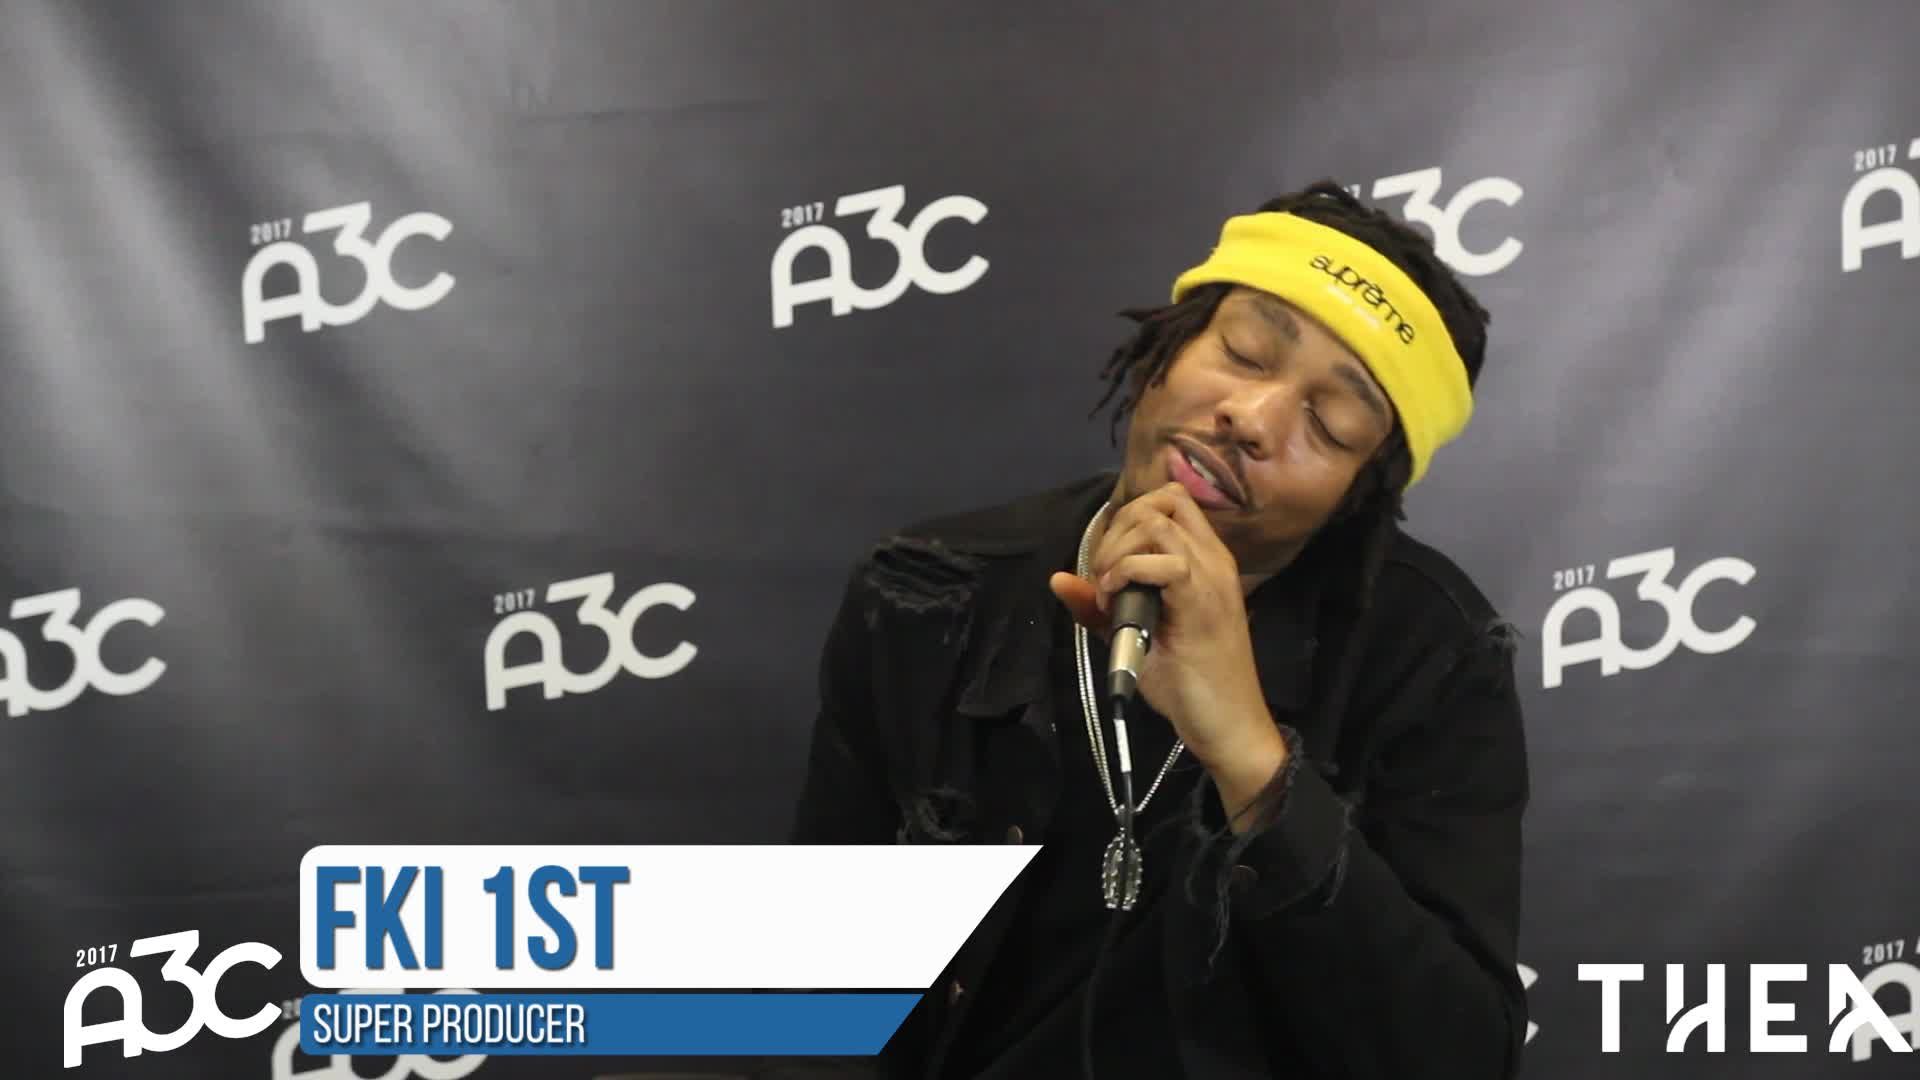 A3C Conference - FKi 1st Interview